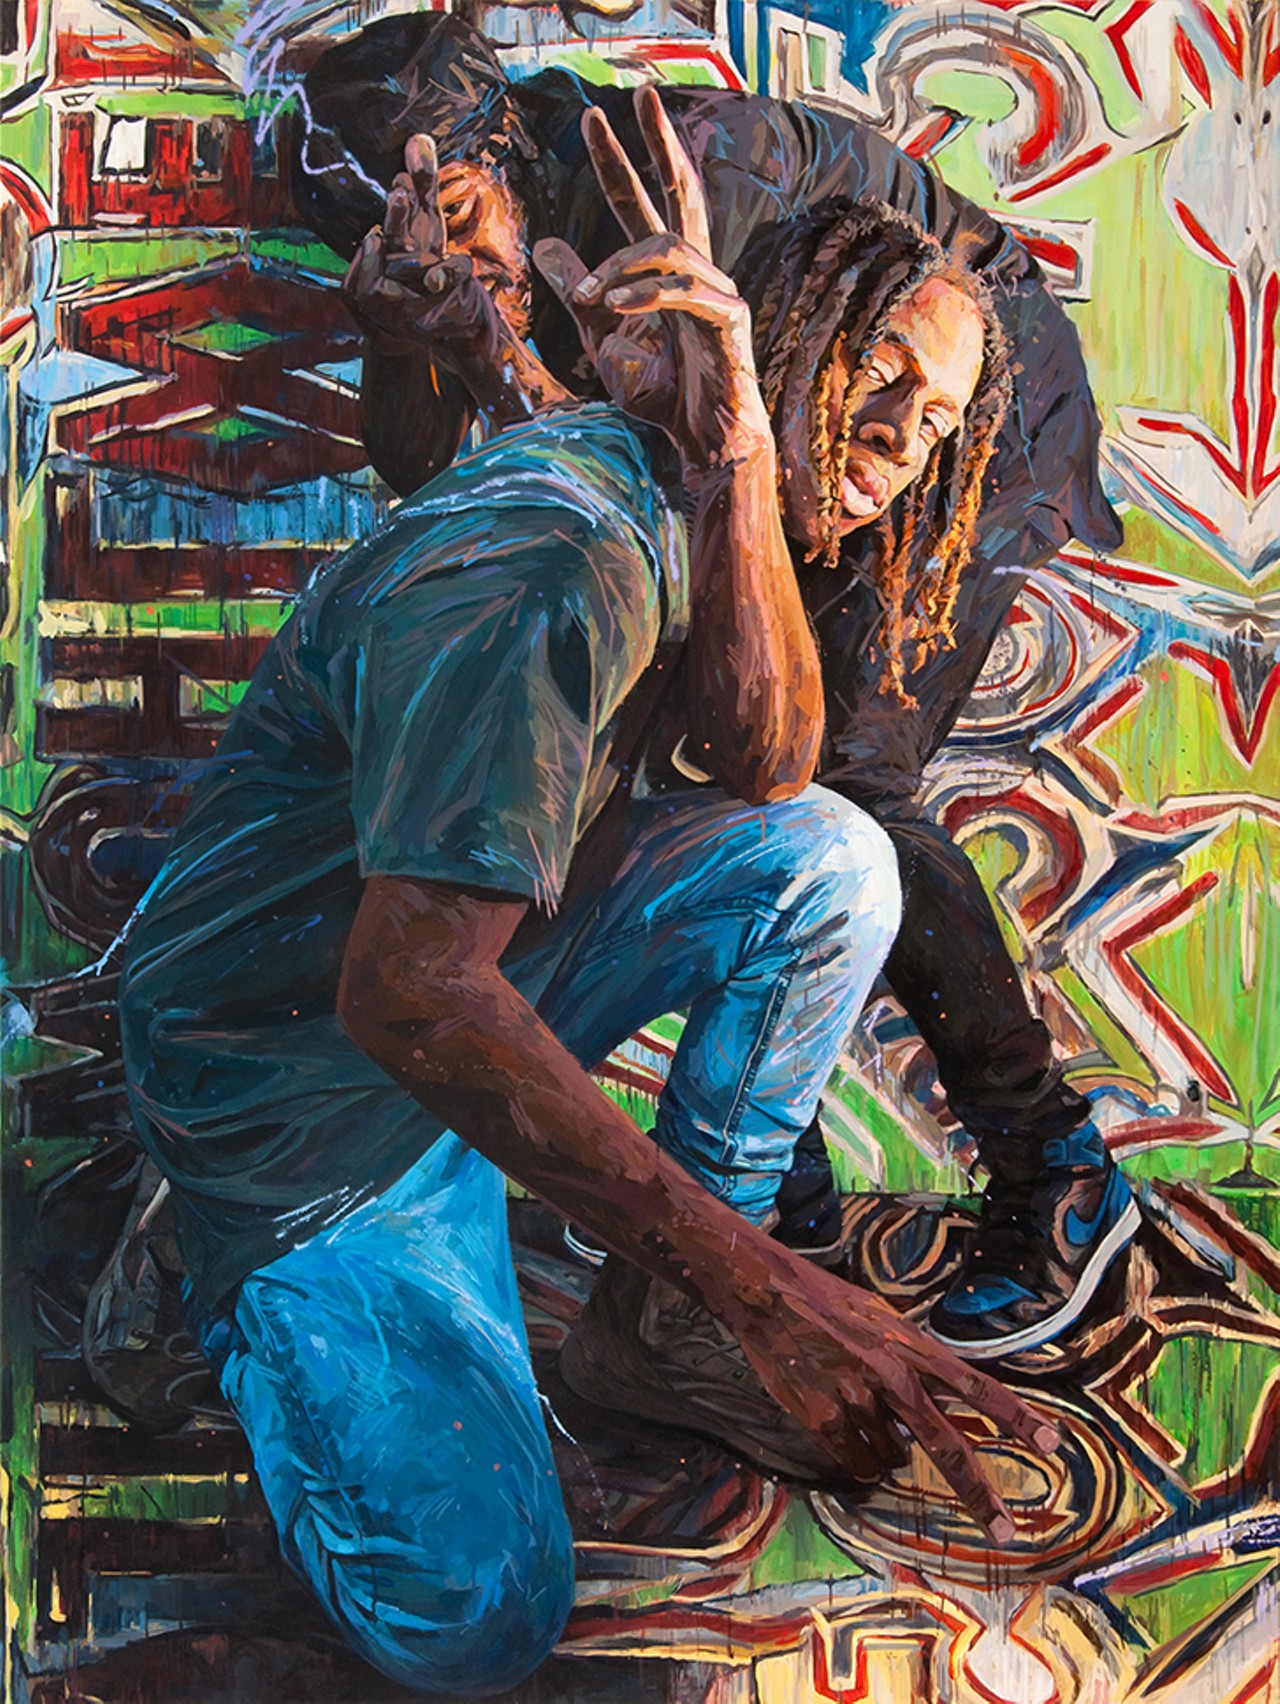 Through Aug. 28The Florida Prize in Contemporary Art at Orlando Museum of Art"War and Peace in Little Haiti (Rodd, Rick and James)" by Michael Vasquez